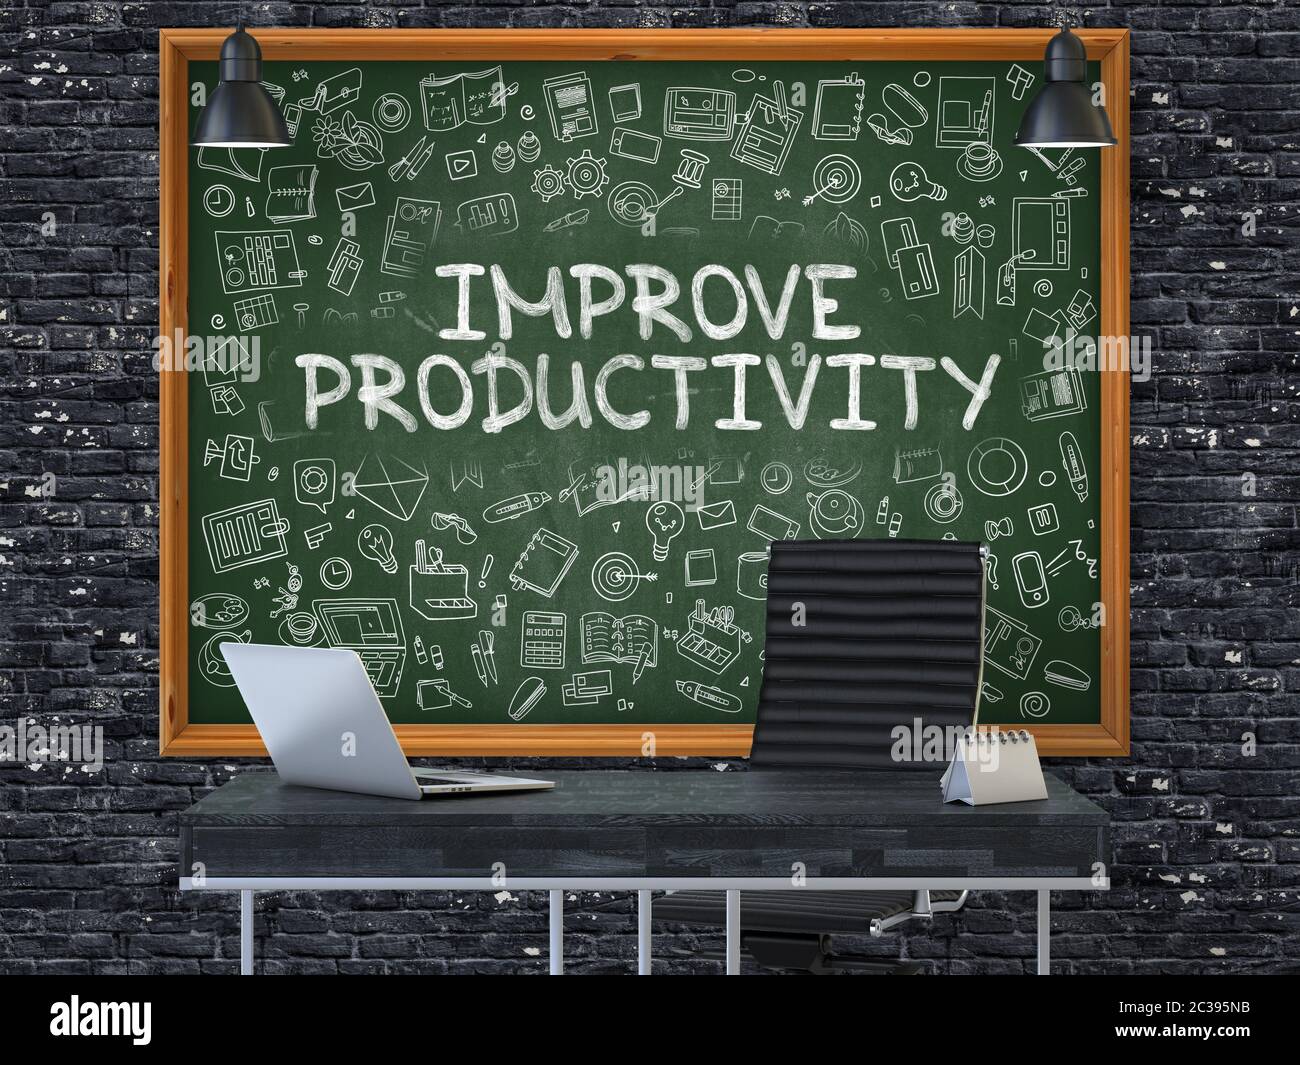 Improve Productivity Concept Handwritten on Green Chalkboard with Doodle Icons. Office Interior with Modern Workplace. Dark Brick Wall Background. 3D. Stock Photo